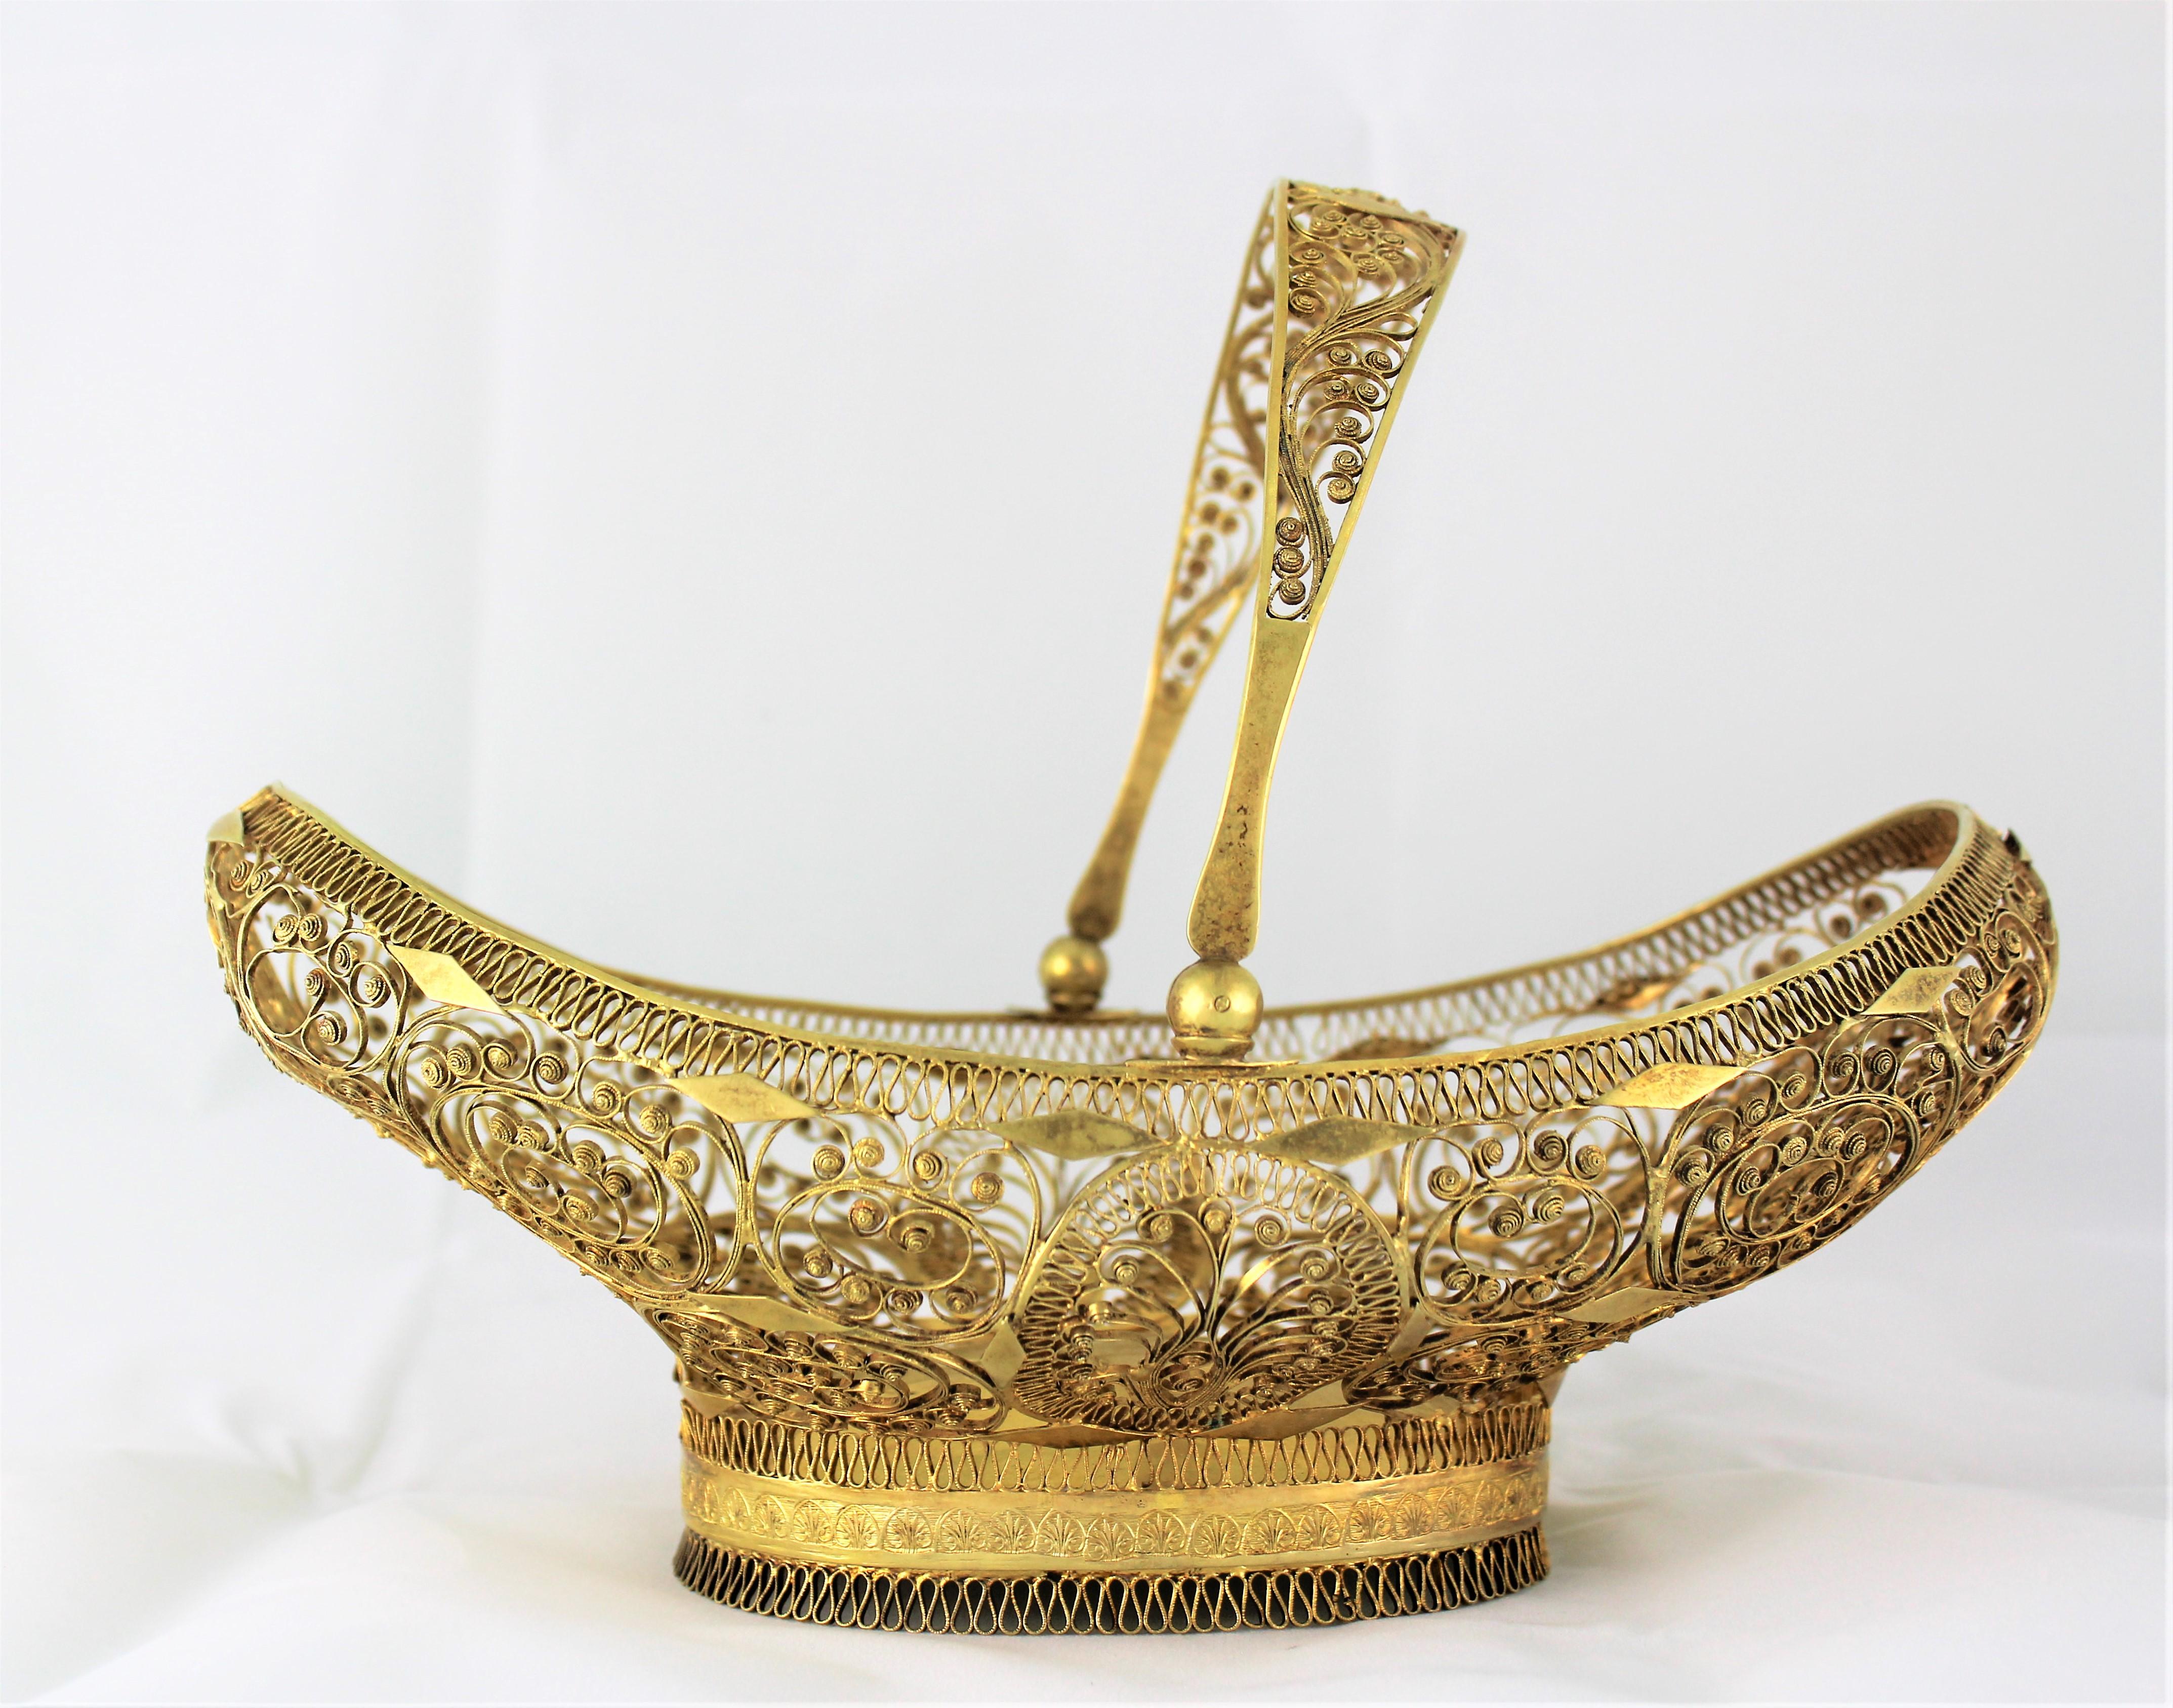 Hand-Crafted 19th Century Filigree Vermeil Silver Basket San Petersburg Russia, 1841 For Sale